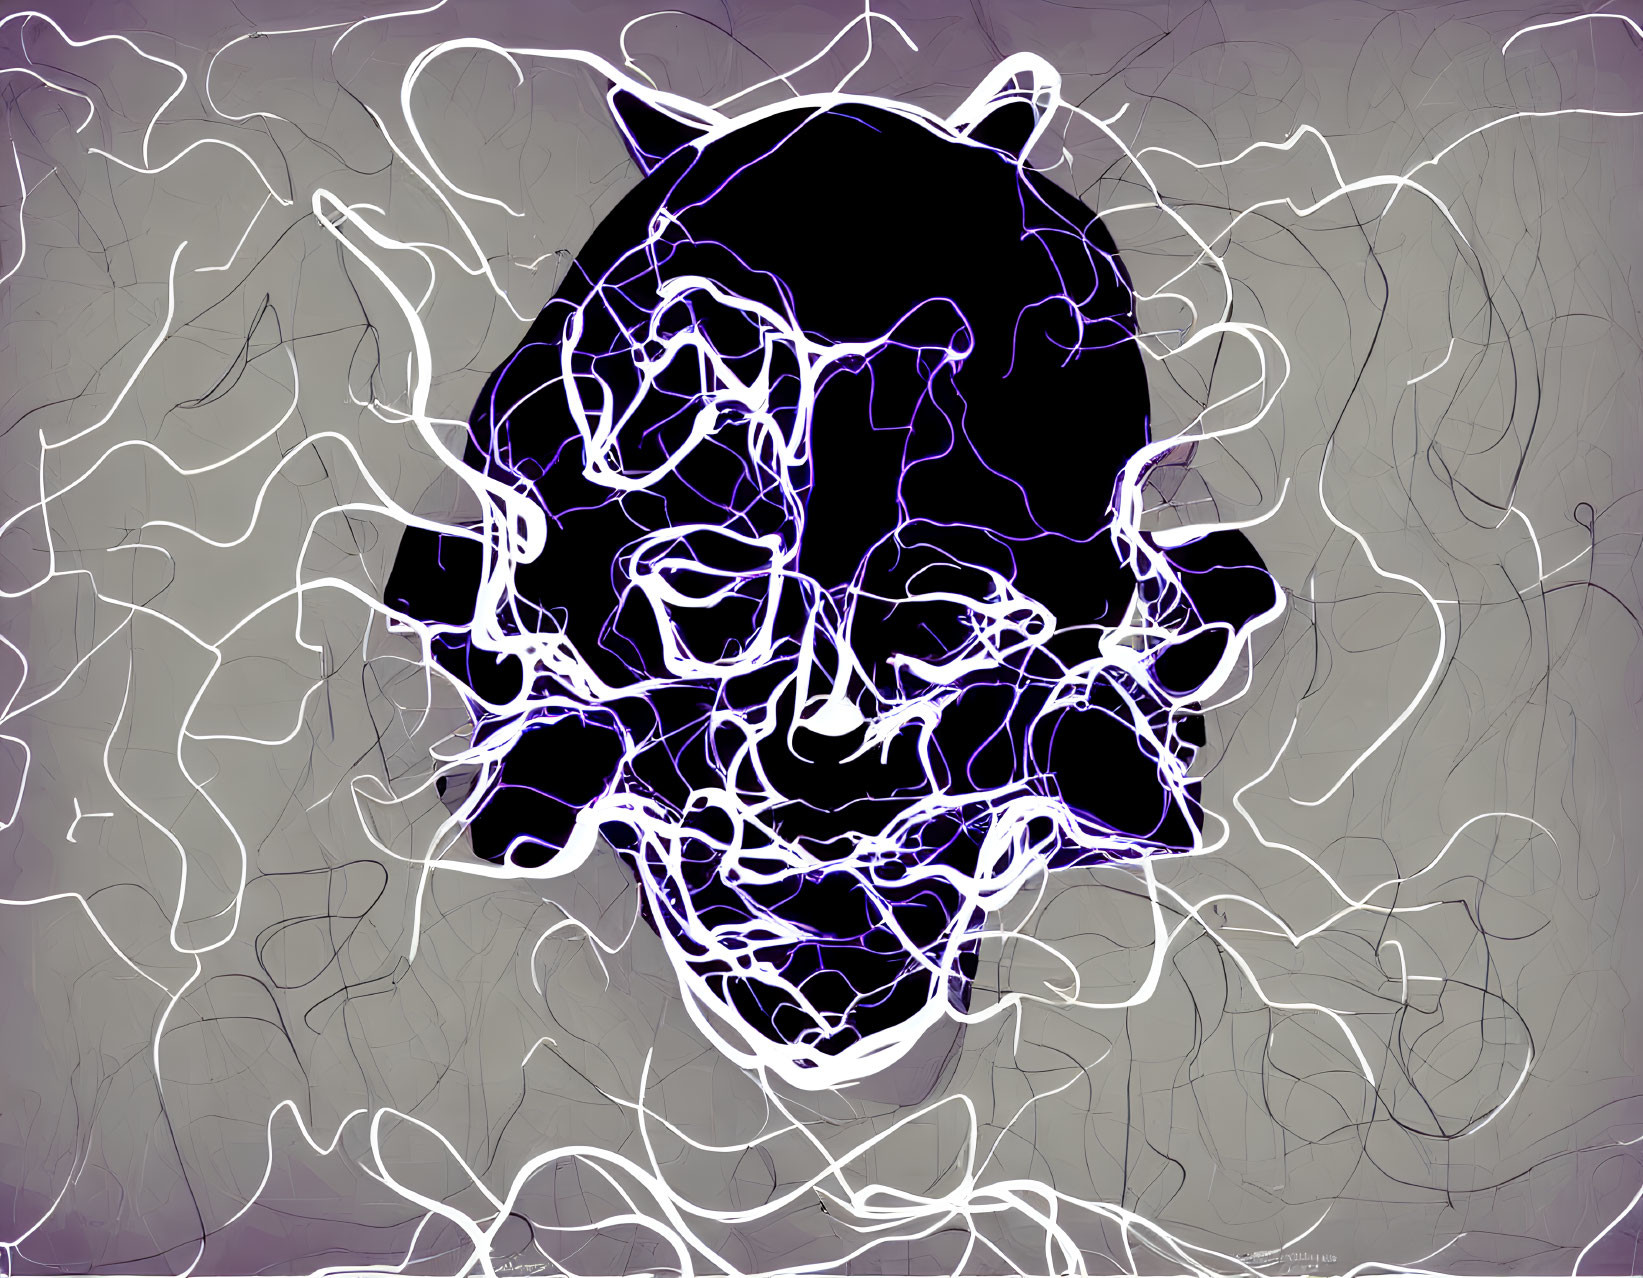 Neon purple skull outline on gray background with white squiggly lines